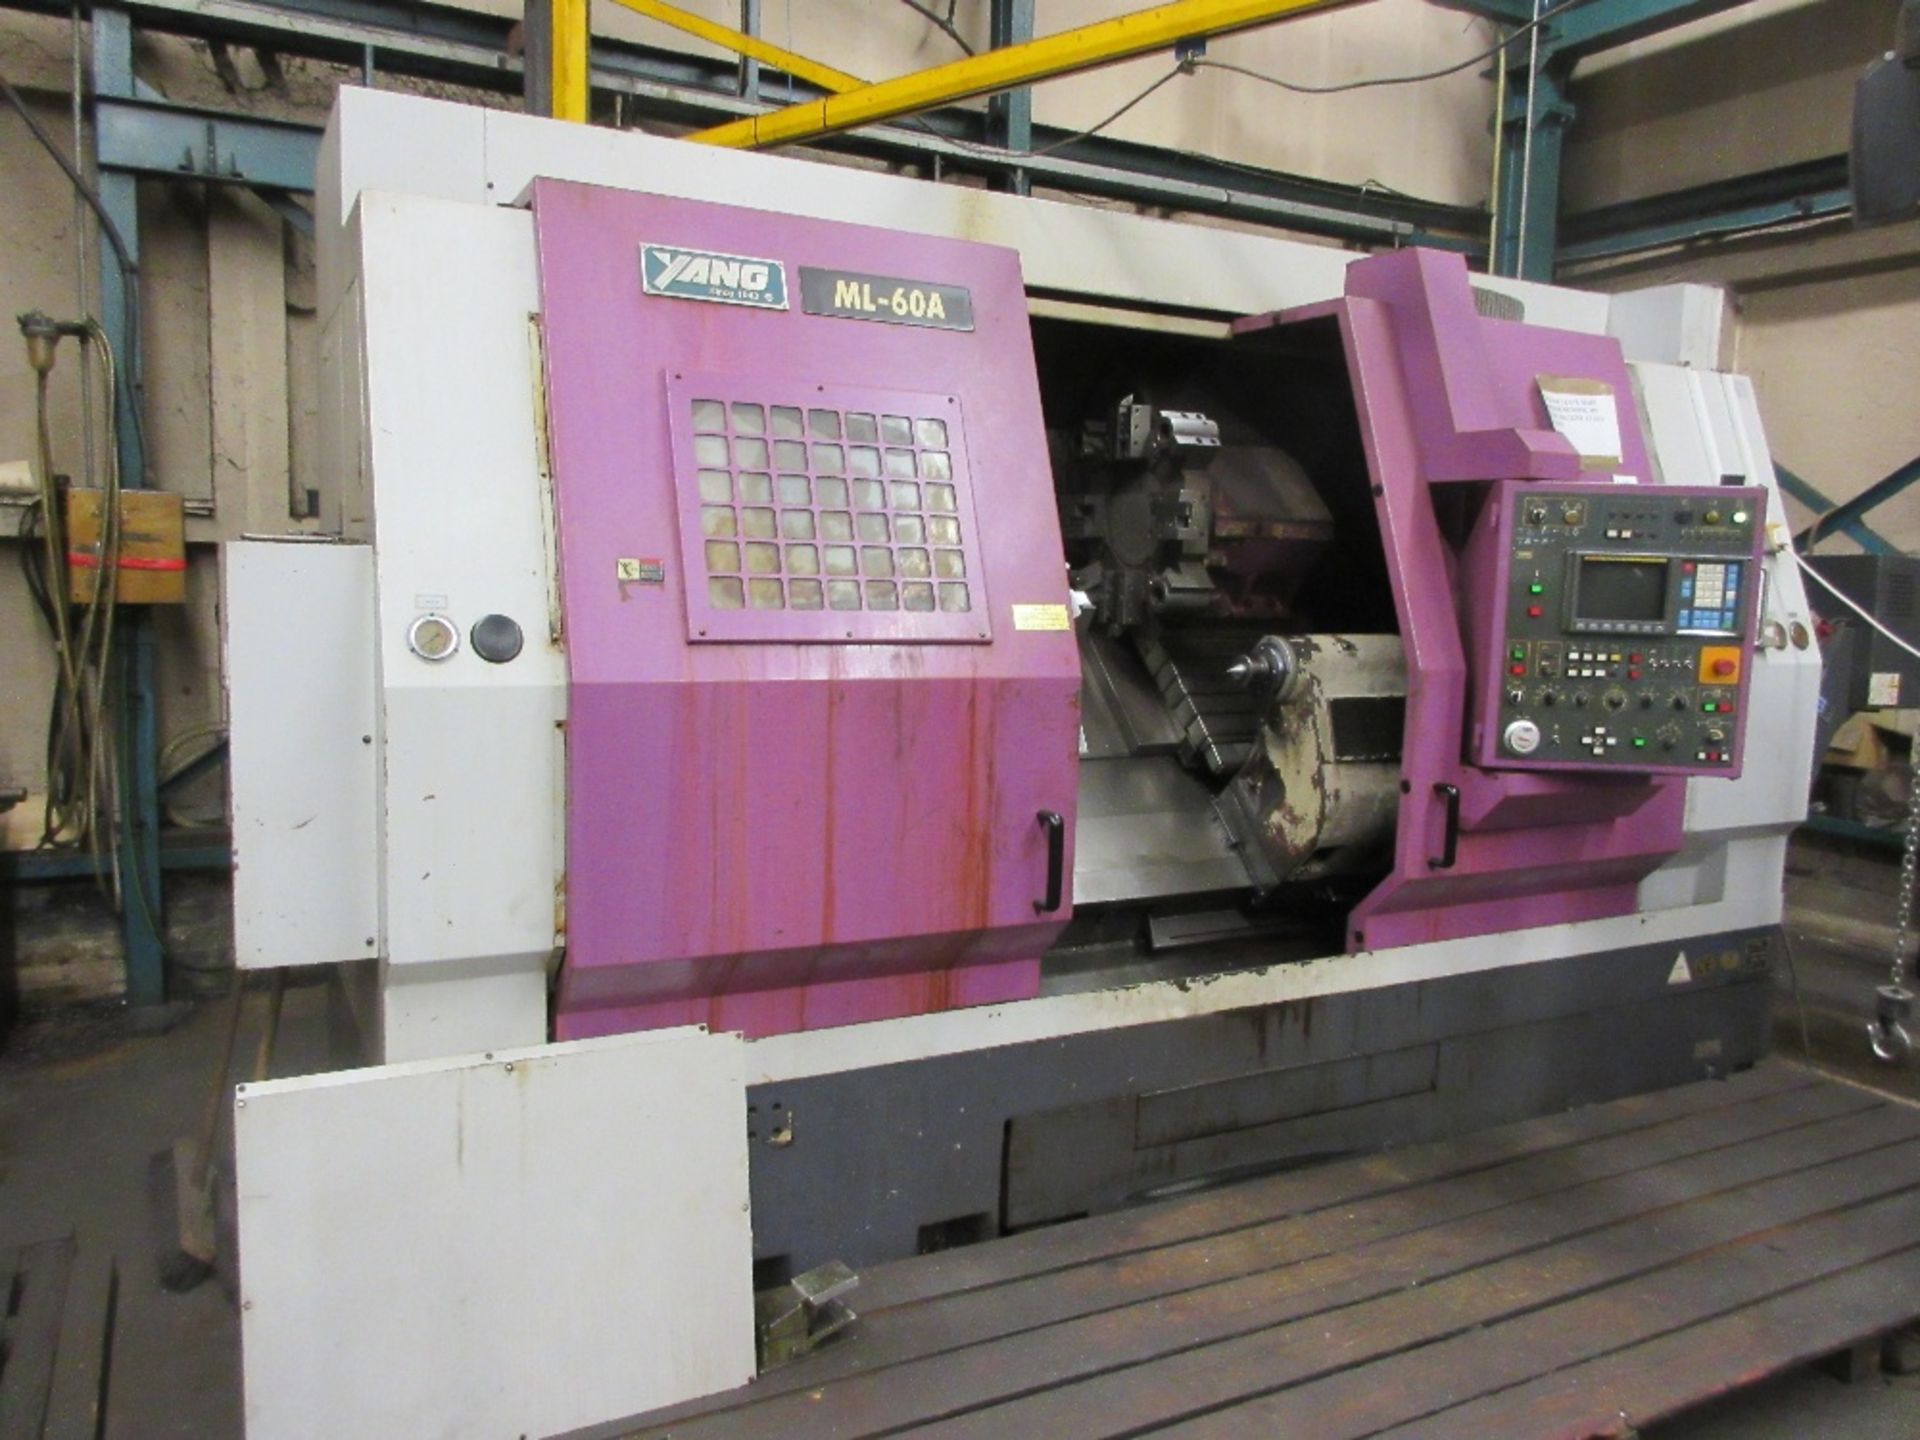 Yang ML-60A CNC lathe with 8 position tool holder. Serial No. K20097. YOM 1999 incorporating Fanuc